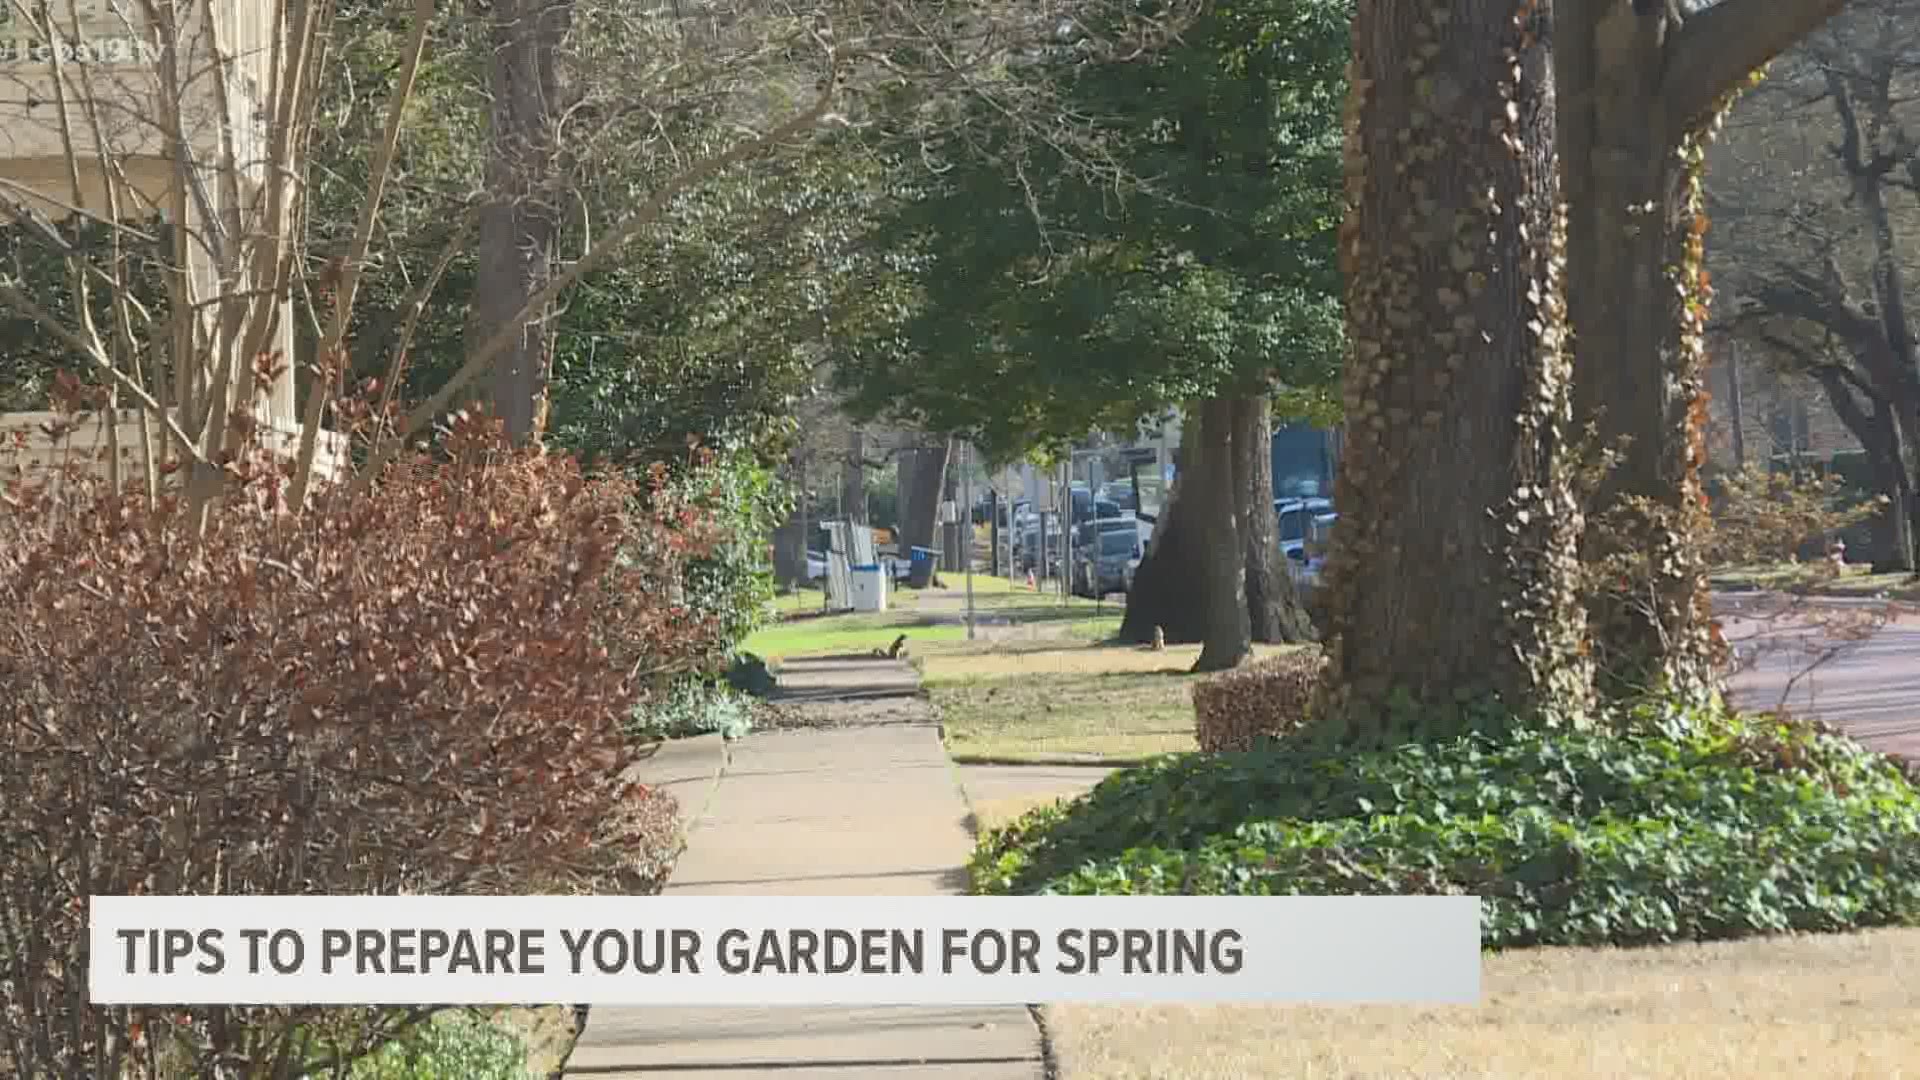 The Smith County Master Gardeners have a few tips to bring gardens back into bloom.